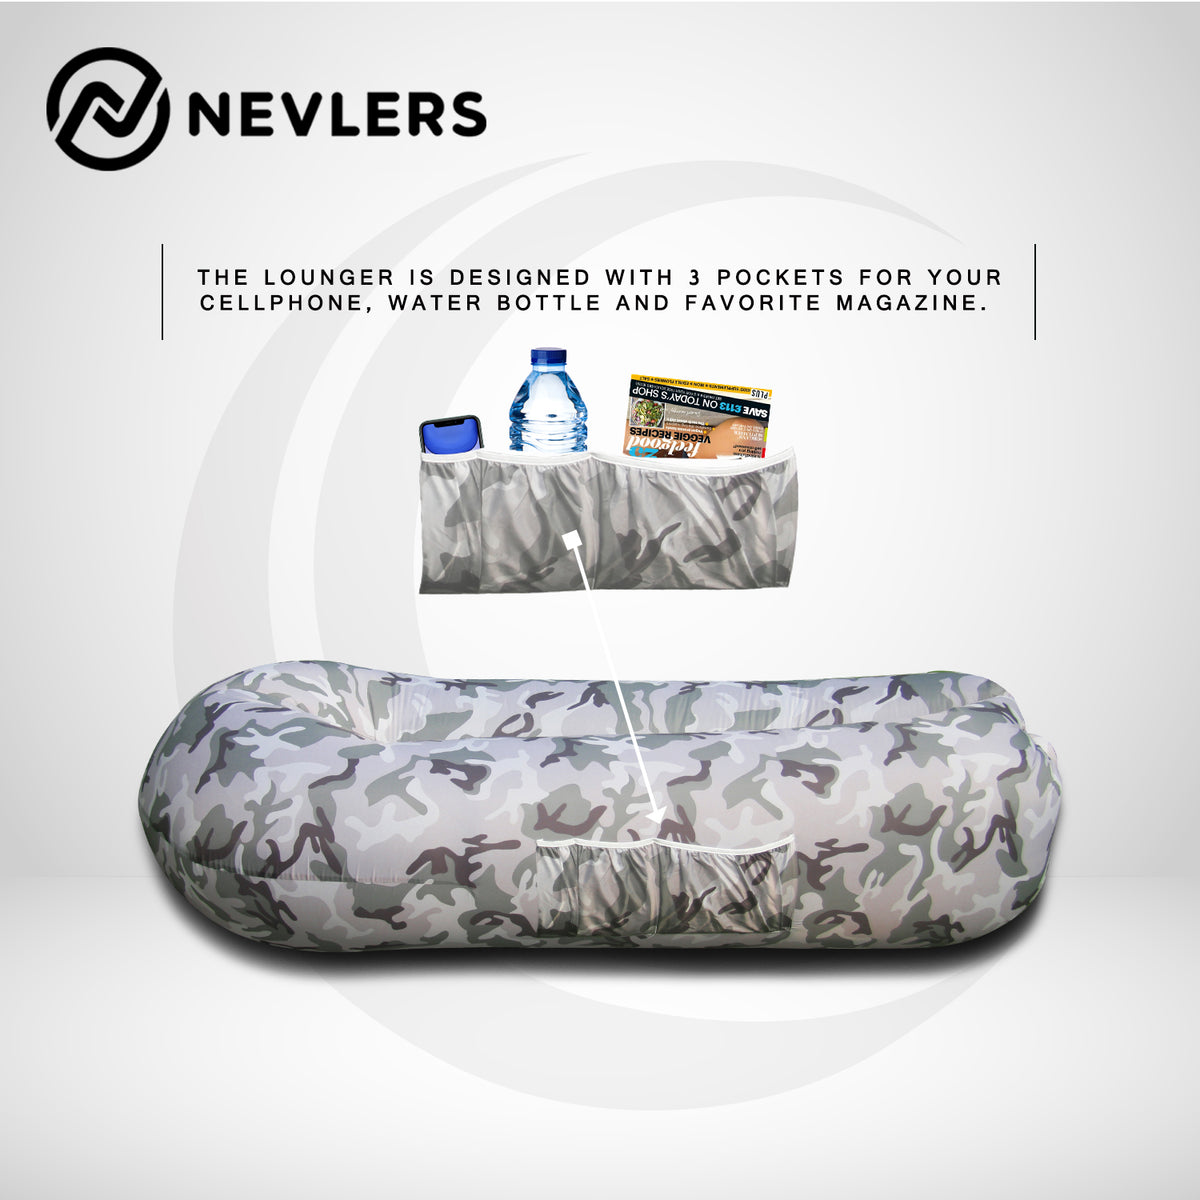 Inflatable Lounger - Gray Camo - 1 Pack